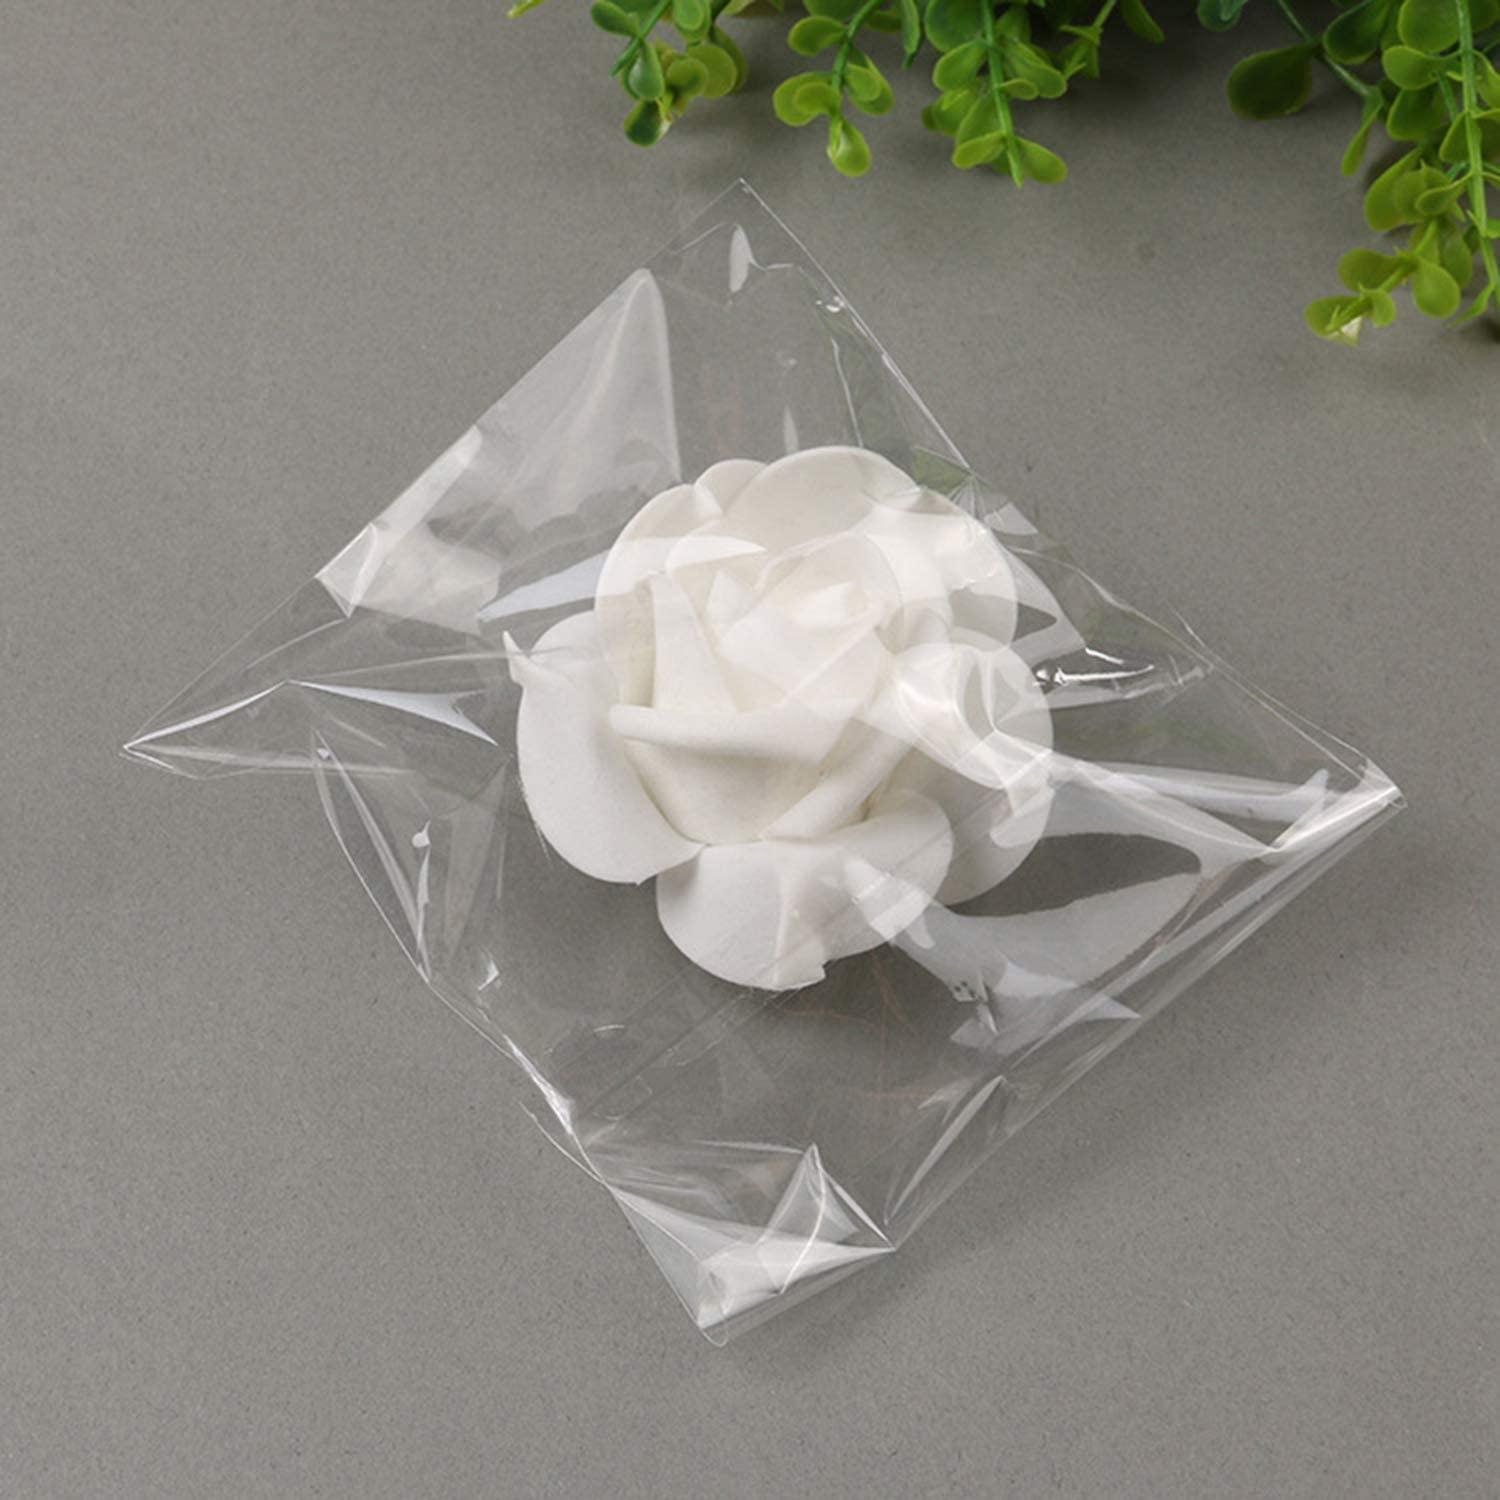 Morepack Clear Self Sealing Cellophane Bags,4x6 Inches 200 Pcs Cookie Bags Resealable Cellophane Bag for Packaging Cookies,Gifts,Favors, Products,Candy - CookCave